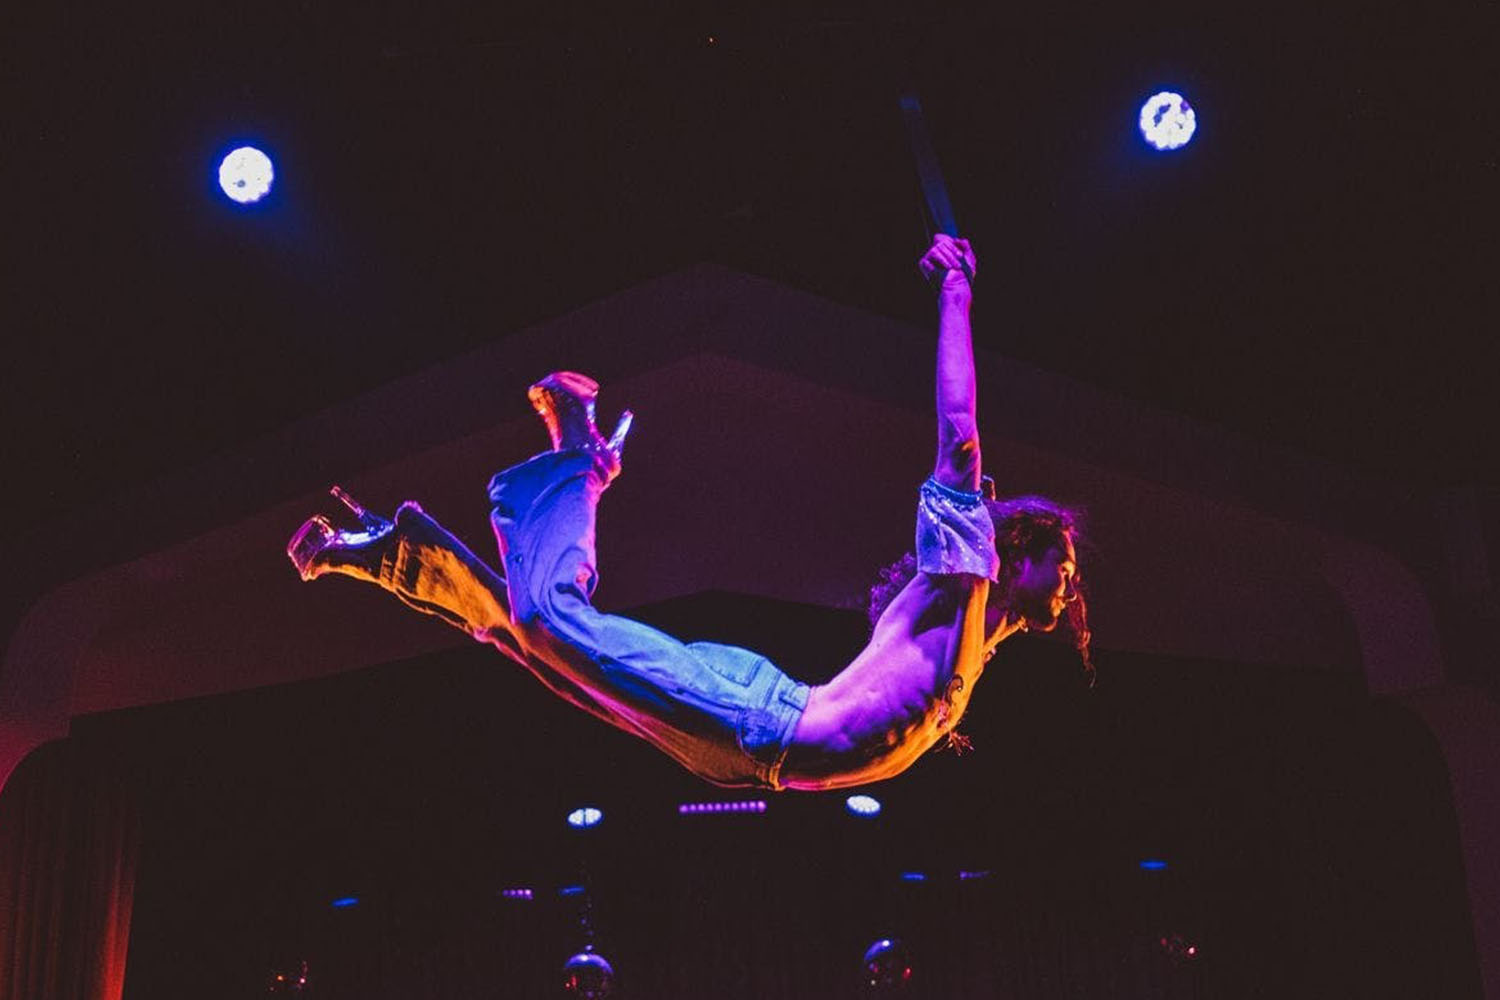 Aerialists like Troy Lingelbach dazzle and delight